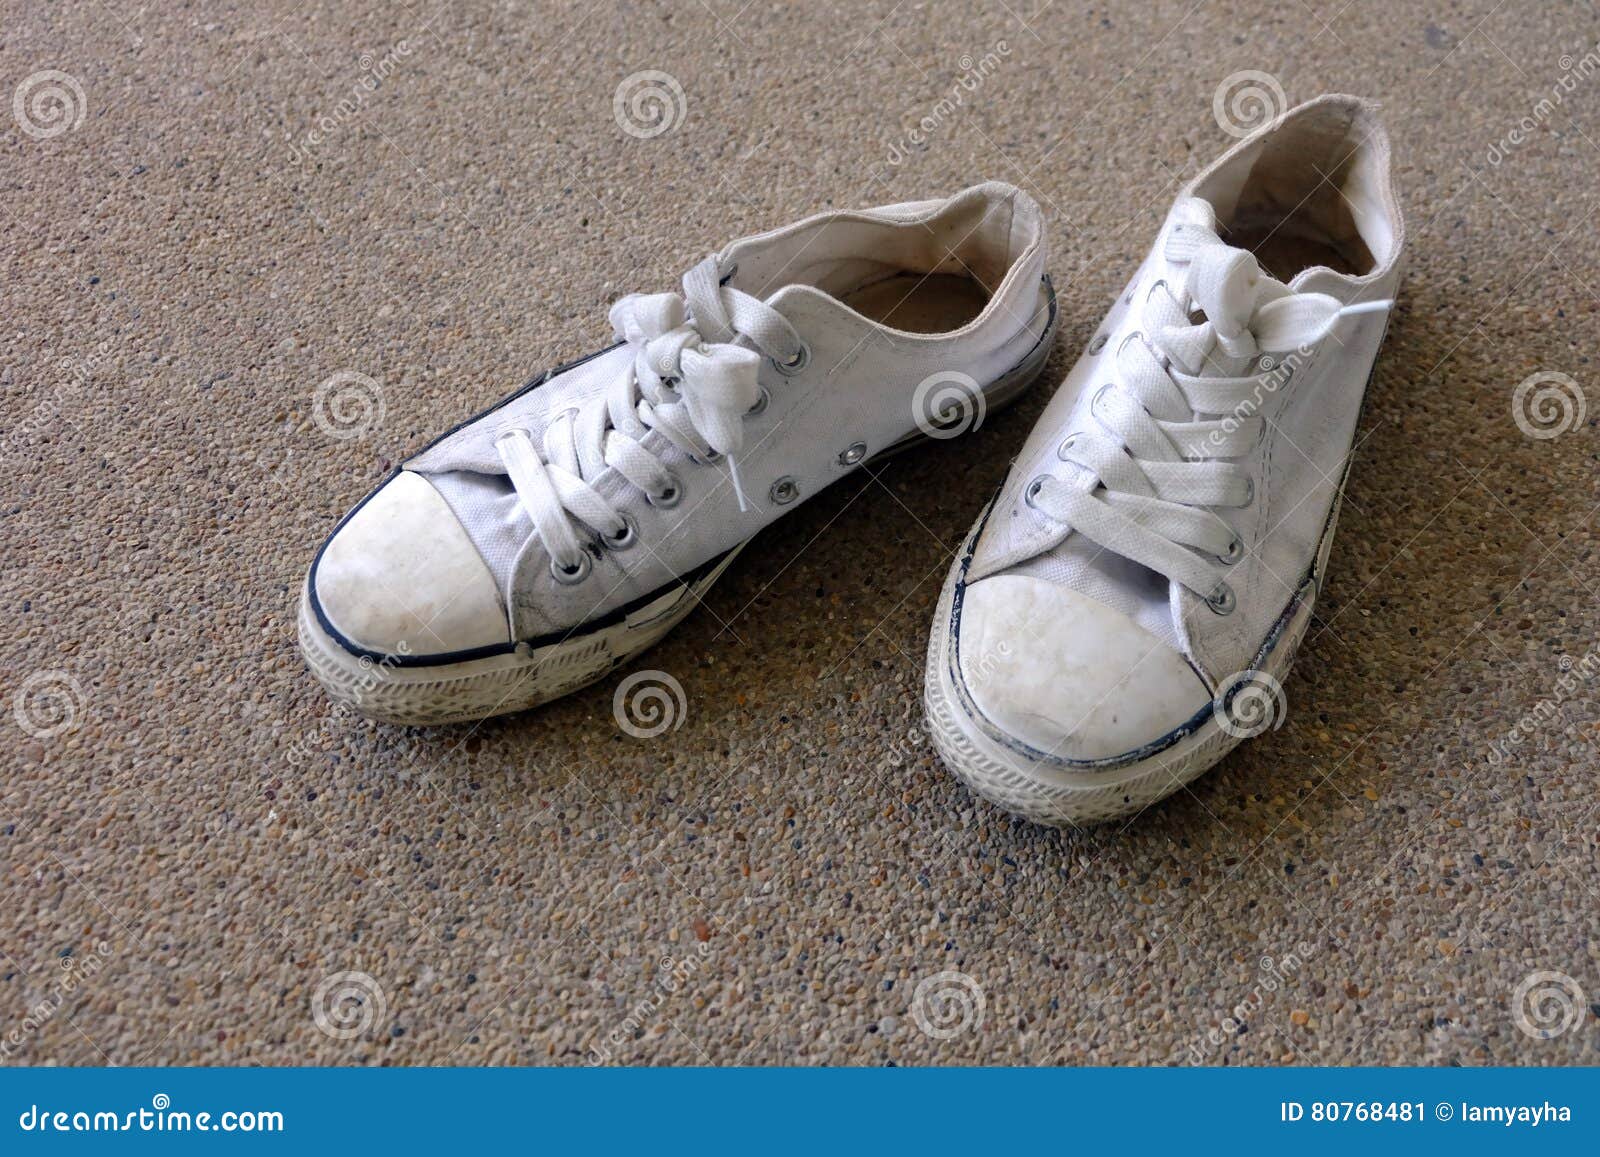 Vintage Shoes, White Sneakers on Floor Background Stock Image - Image ...